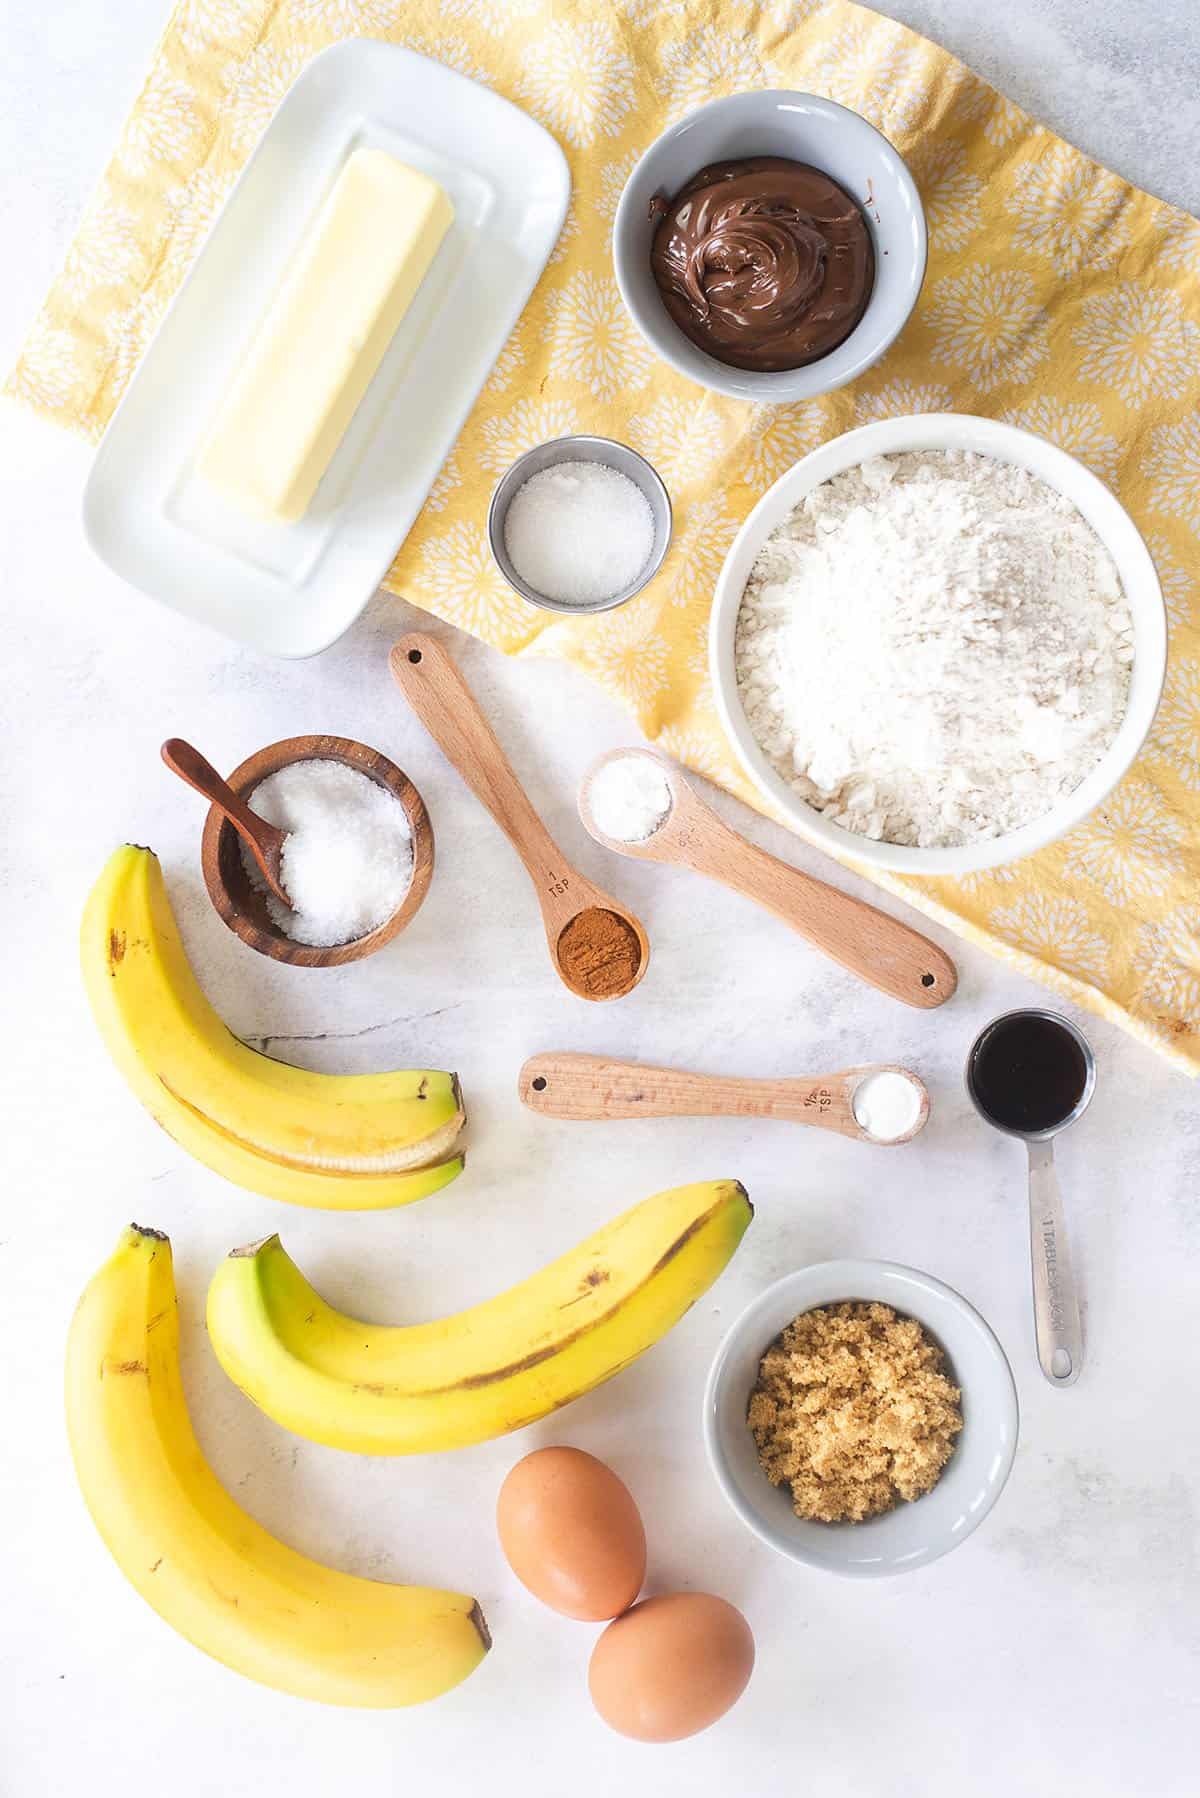 ingredients for Nutella banana bread.